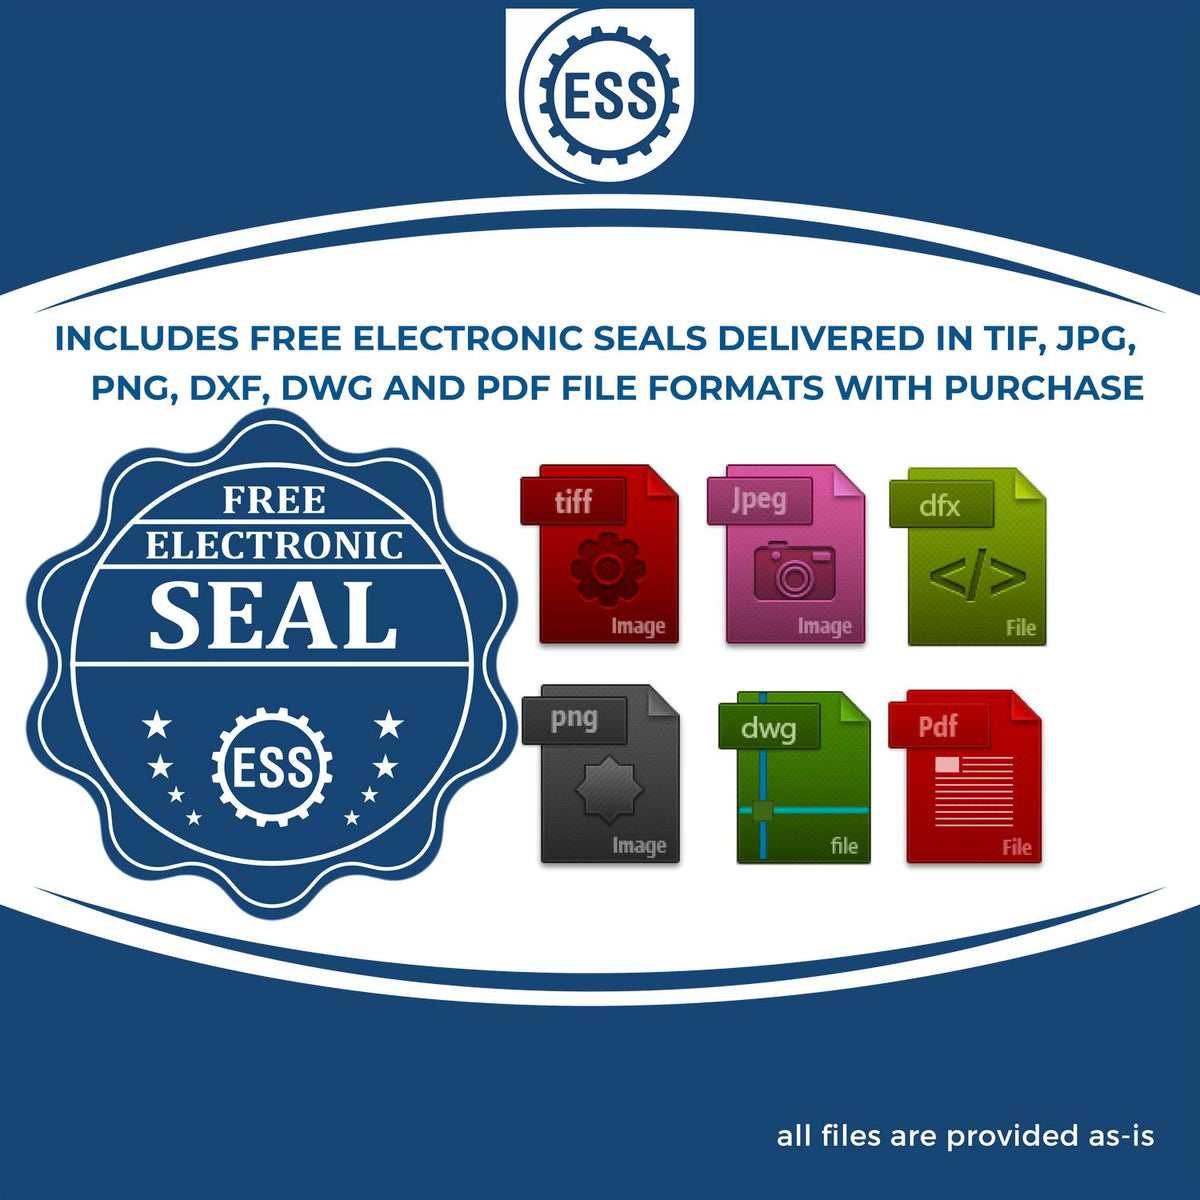 An infographic for the free electronic seal for the Louisiana Geologist Desk Seal illustrating the different file type icons such as DXF, DWG, TIF, JPG and PNG.